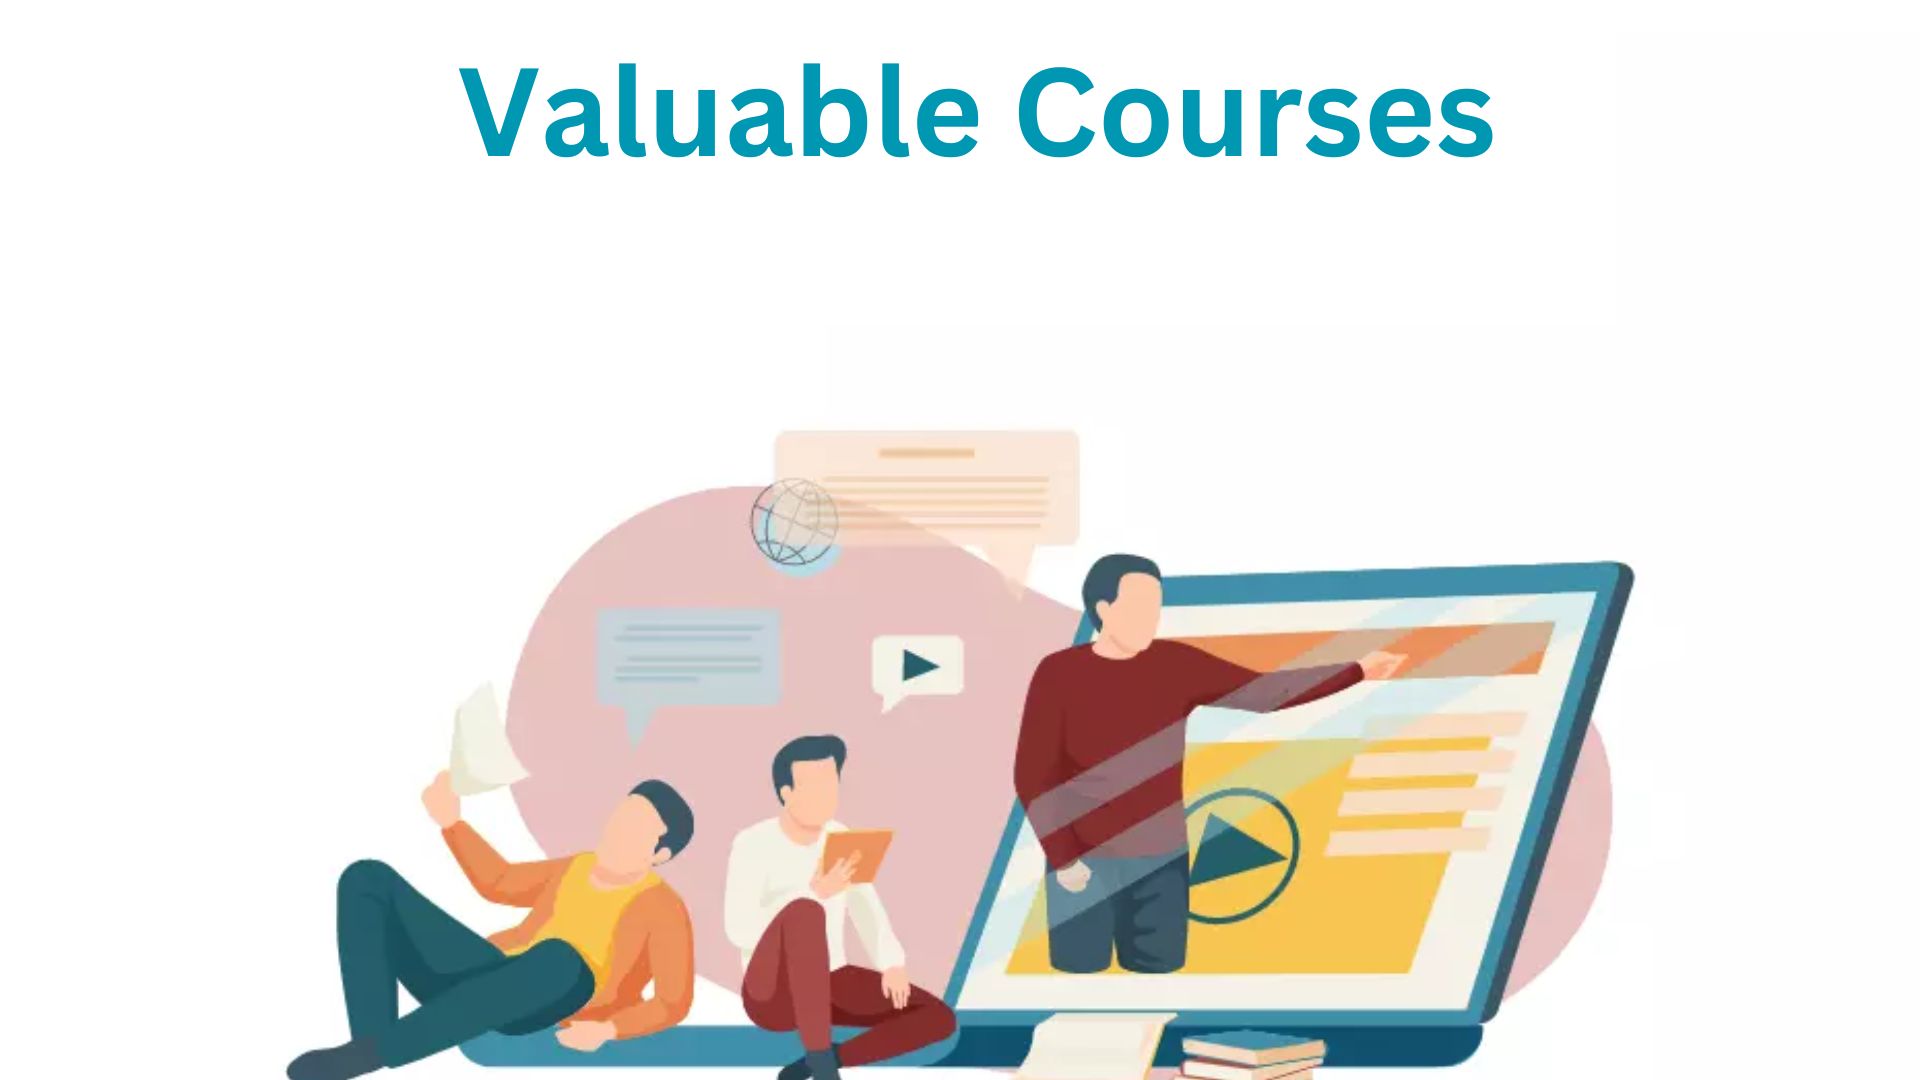 Valuable Courses